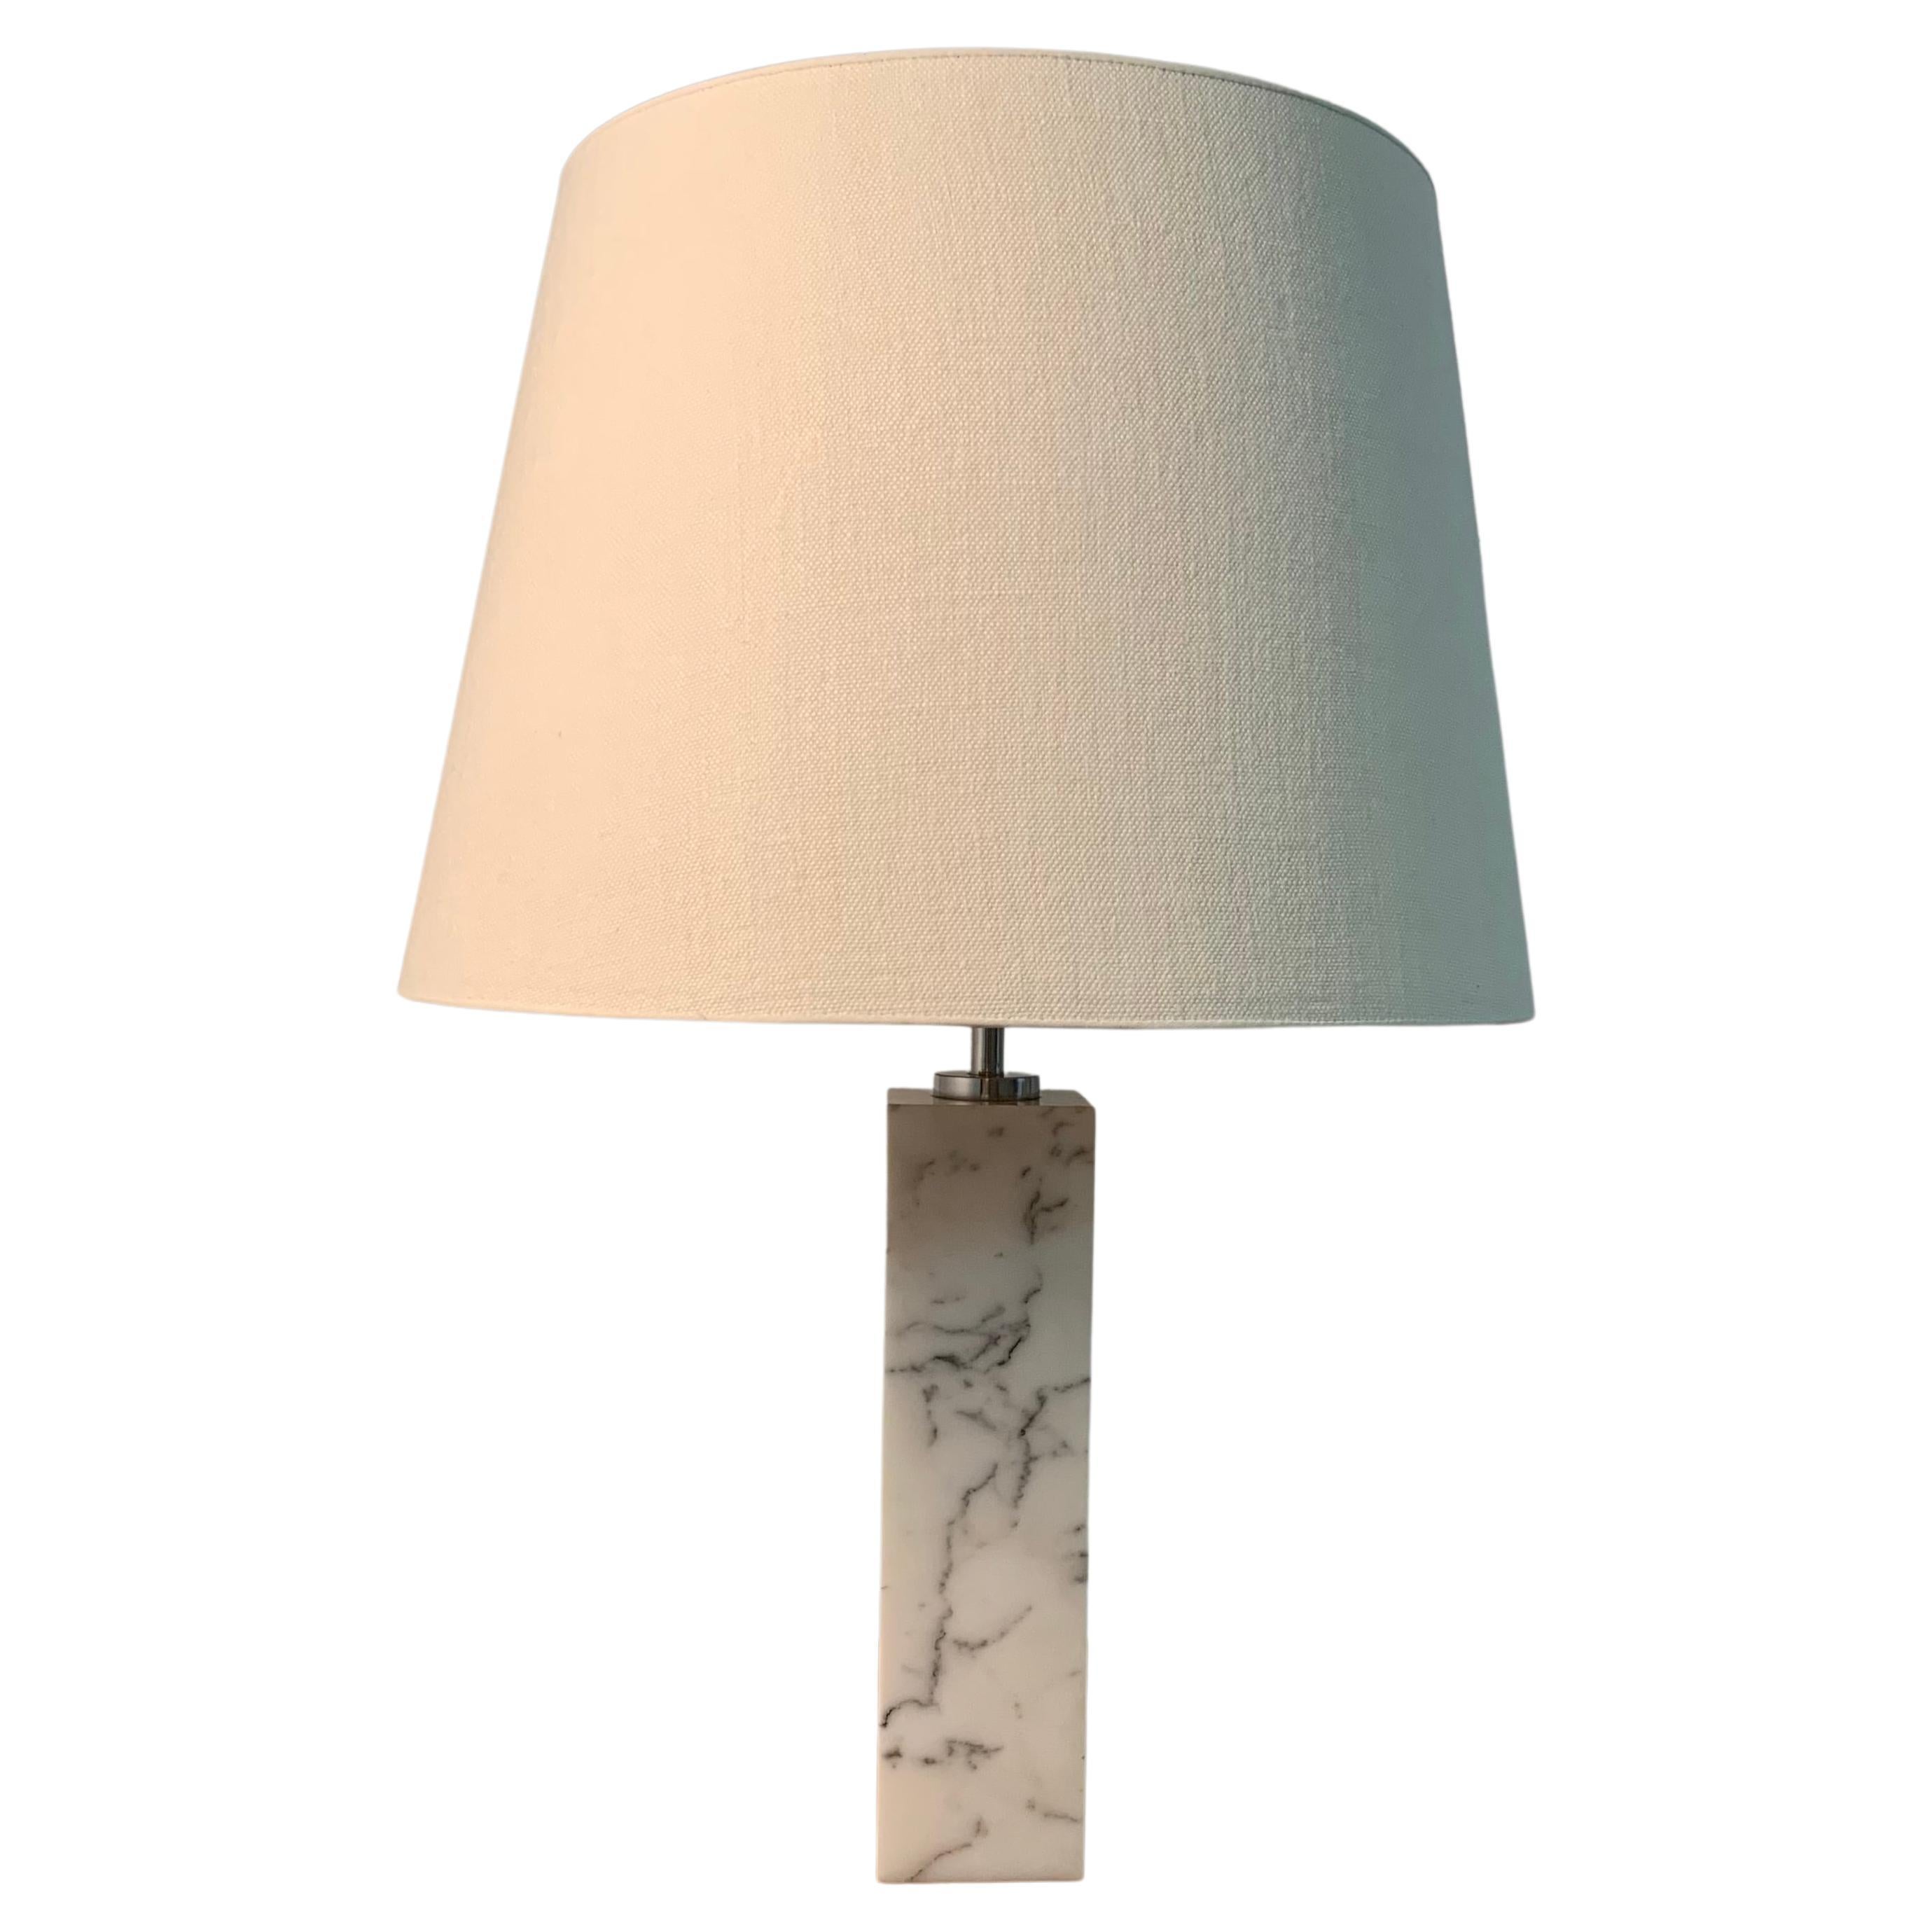 Carrara Marble Florence Knoll Table Lamp Model 180 For Sale